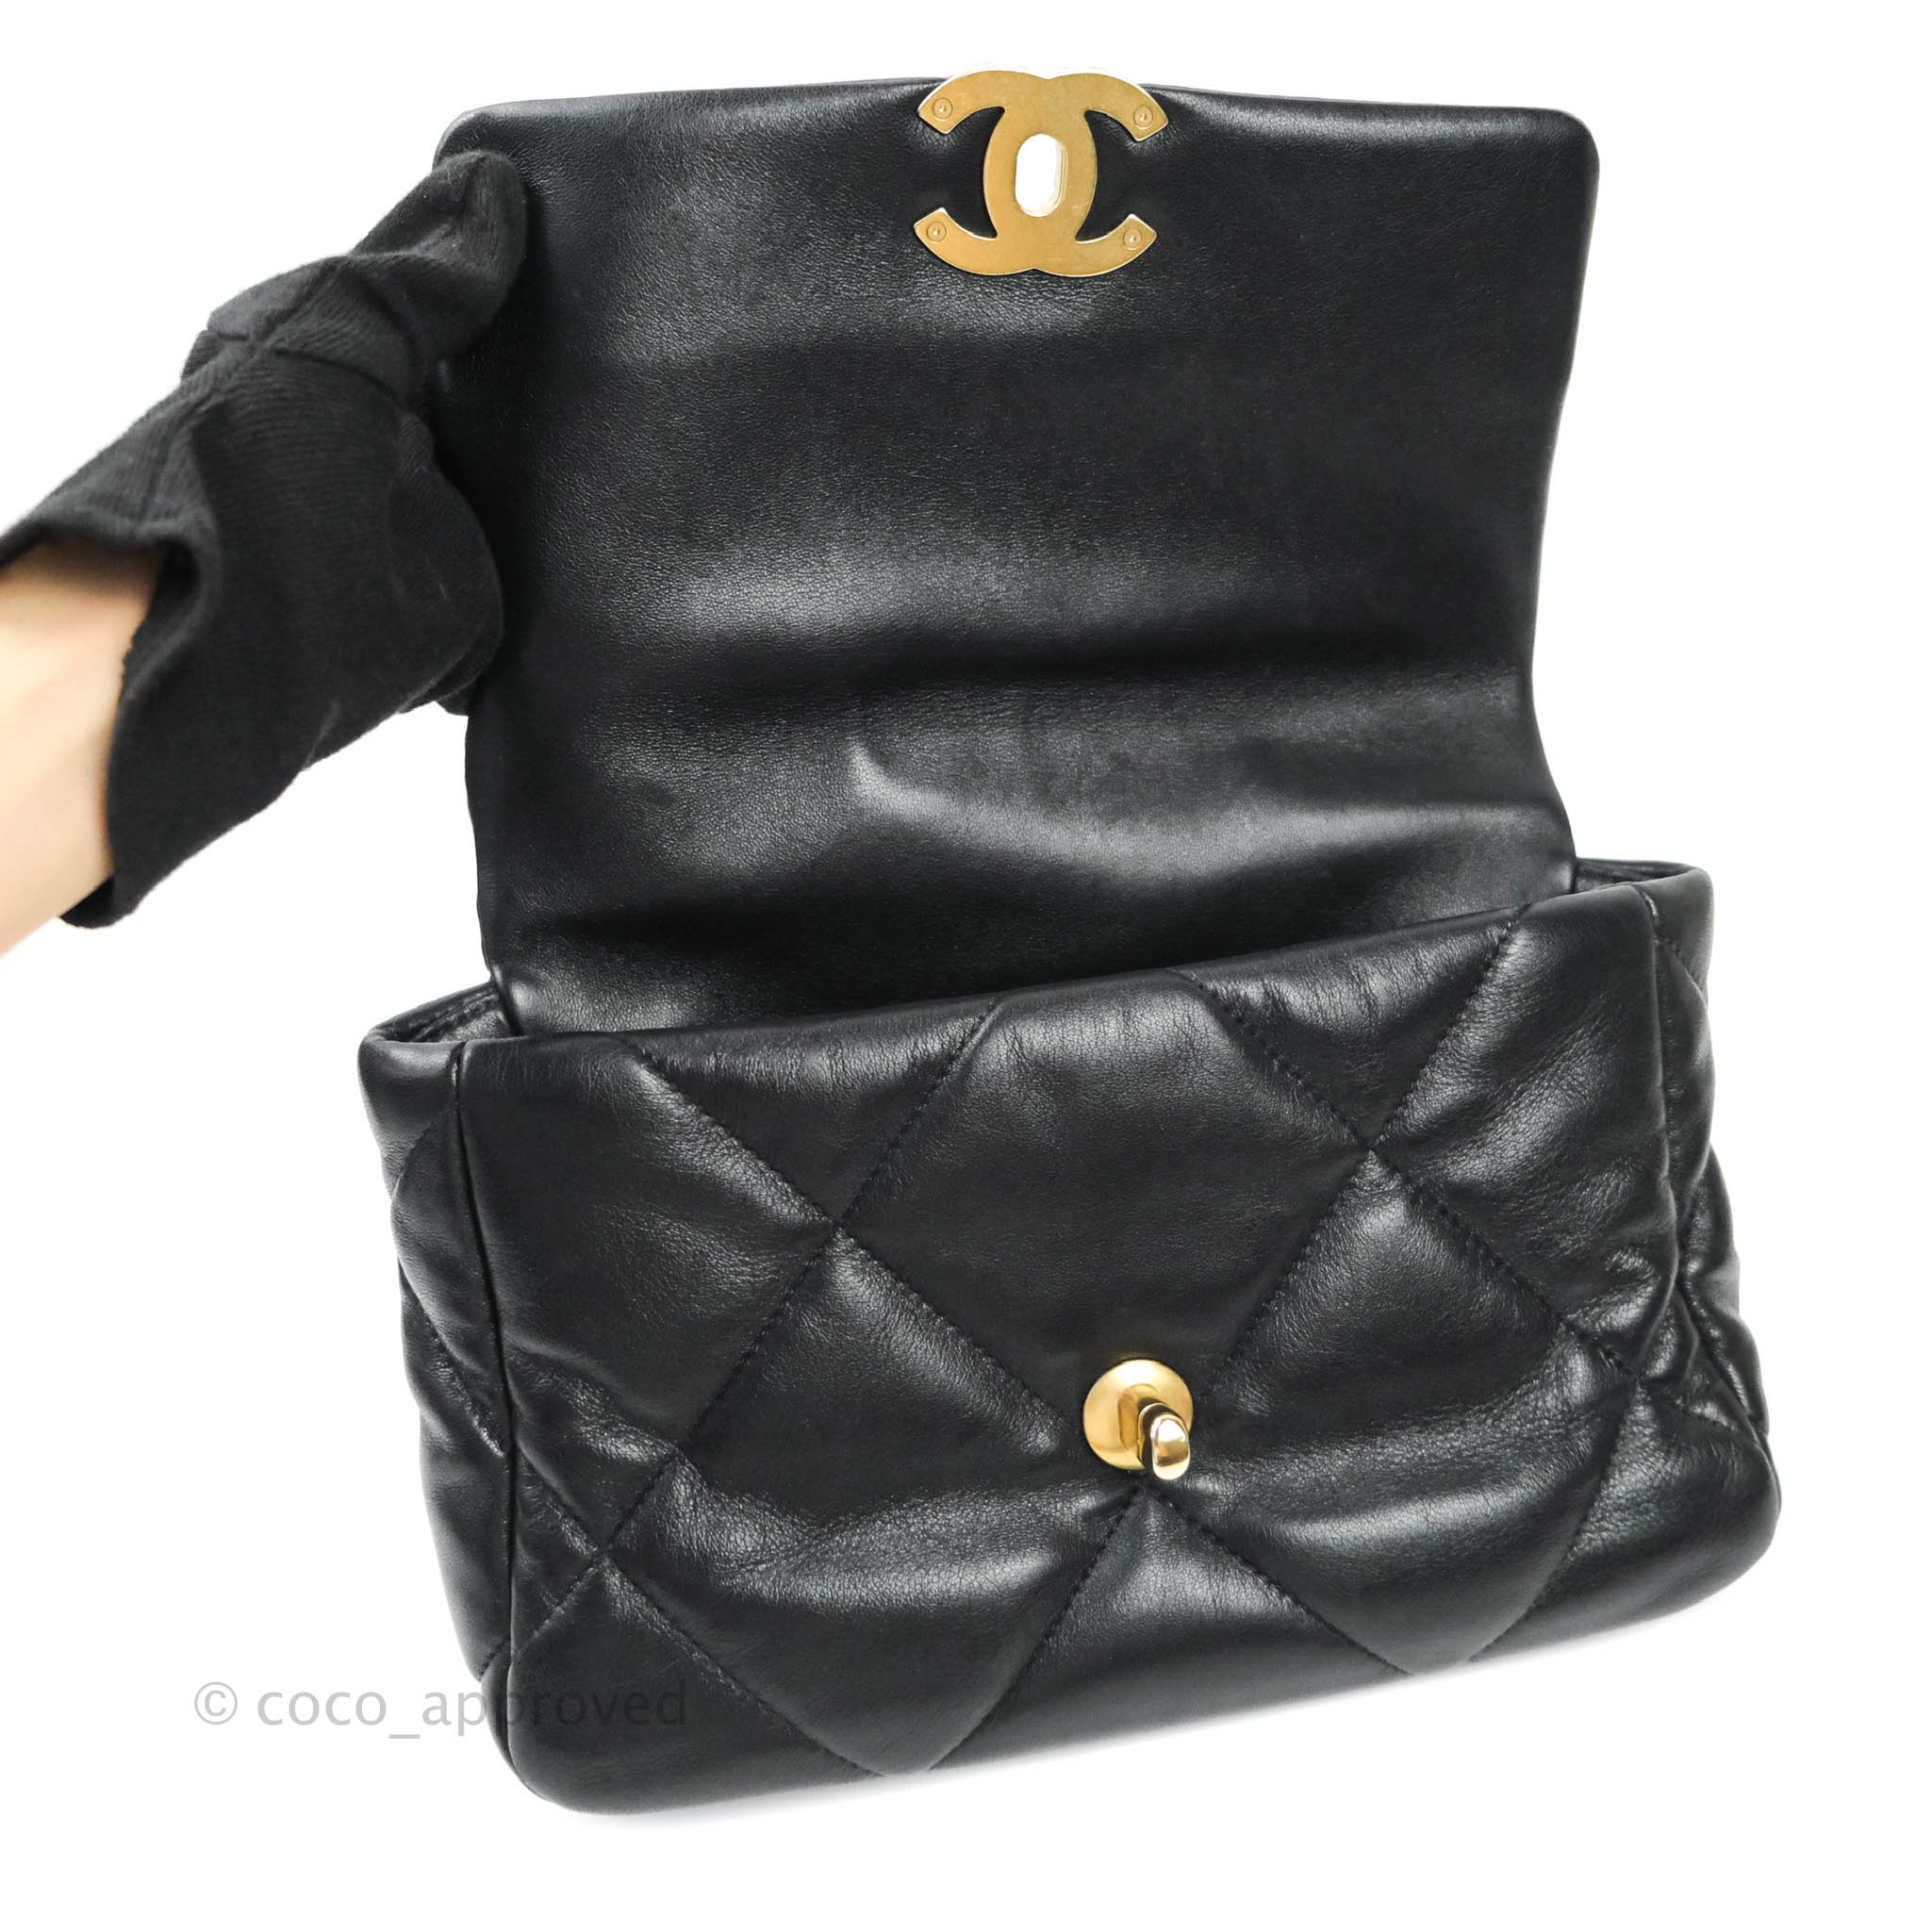 Chanel 19 Small Pouch Black Lambskin Gold Hardware – Coco Approved Studio